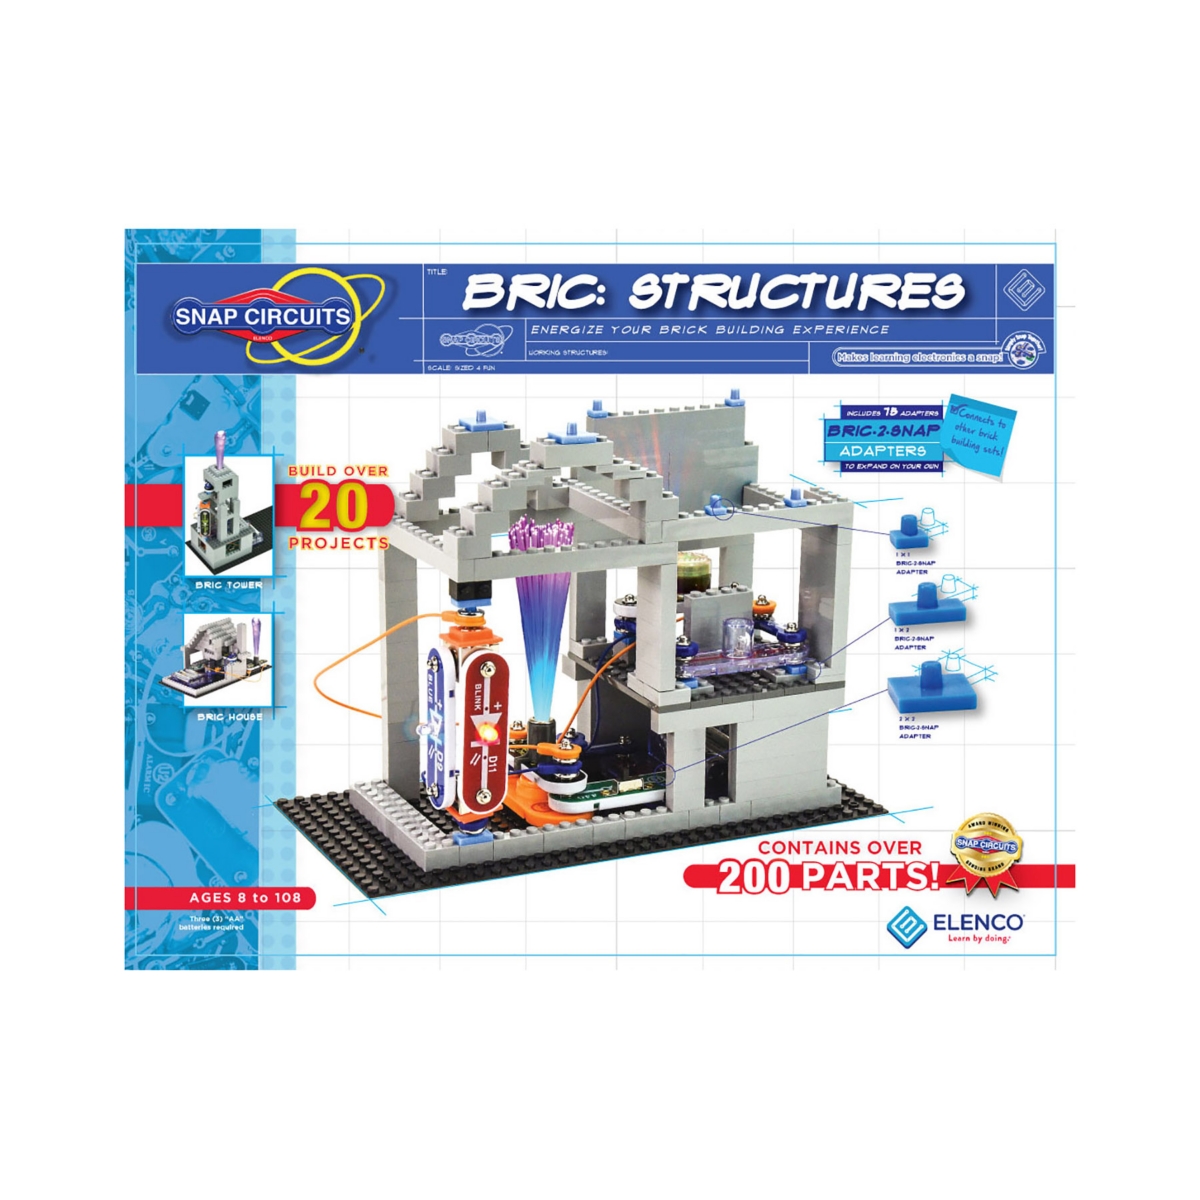 Elenco Kids' Snap Circuits Bric Structures Building Set In Multi